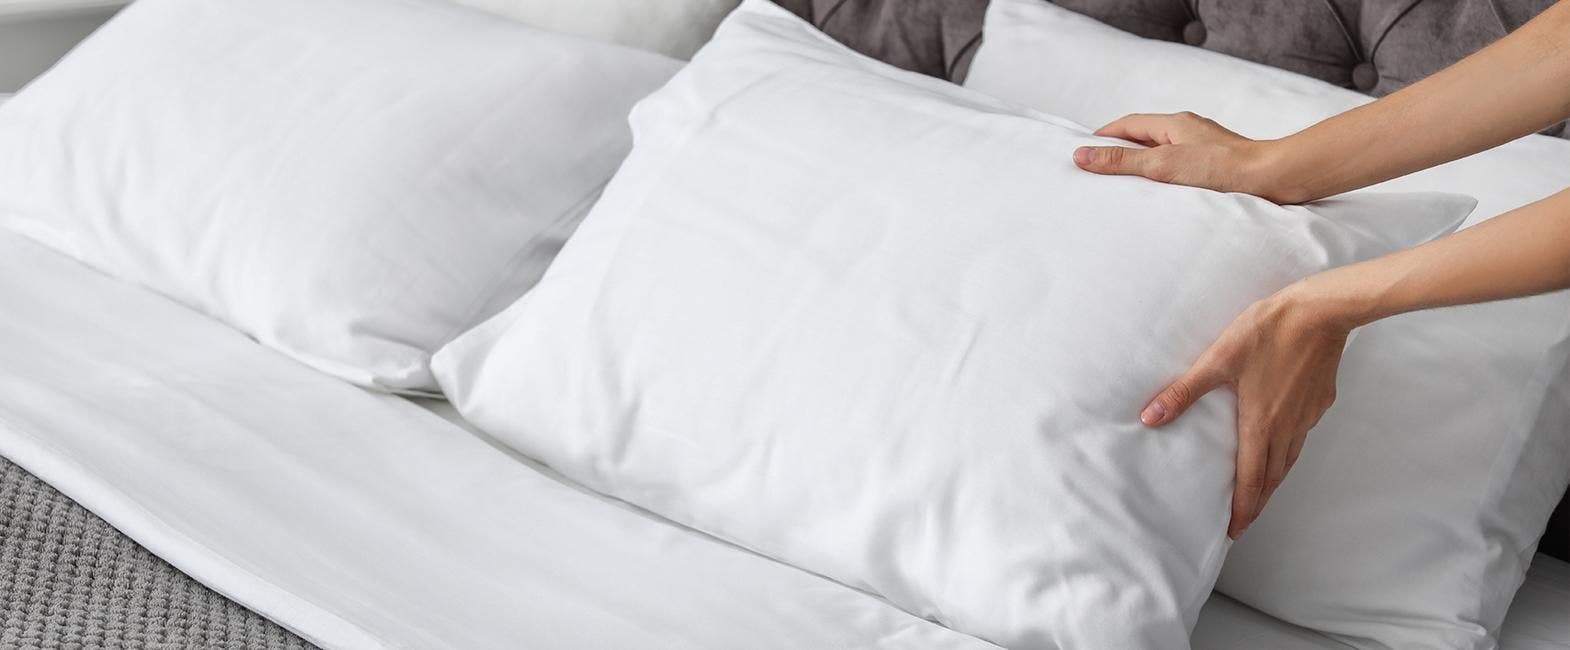 A Guide To Down Pillow Care: Cleaning, Fluffing, And Storing